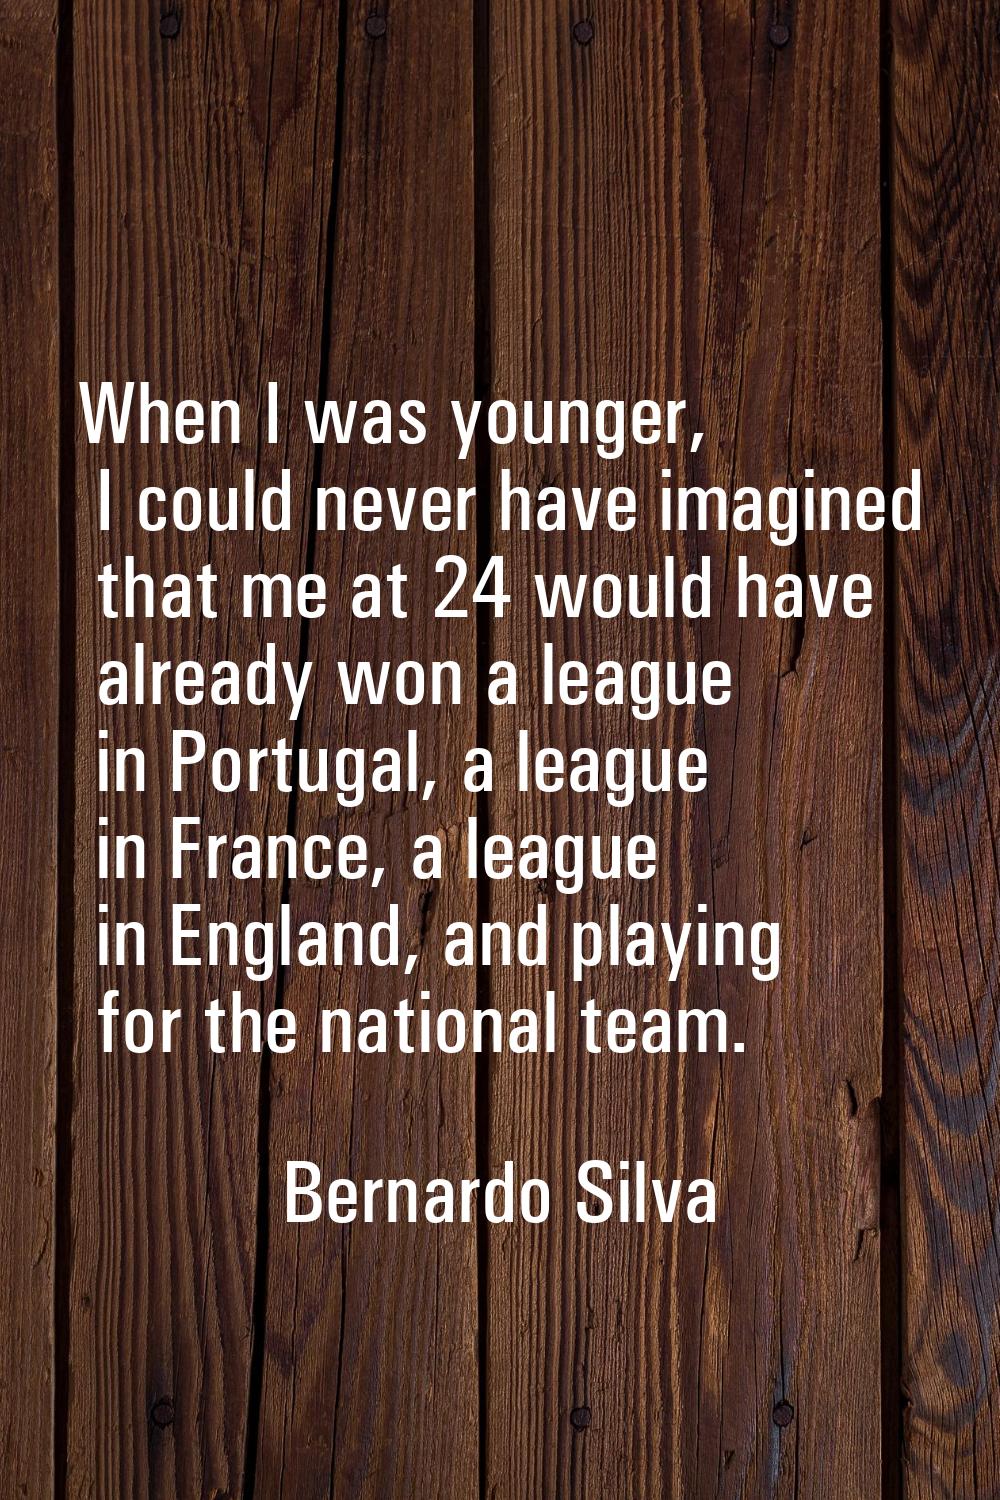 When I was younger, I could never have imagined that me at 24 would have already won a league in Po